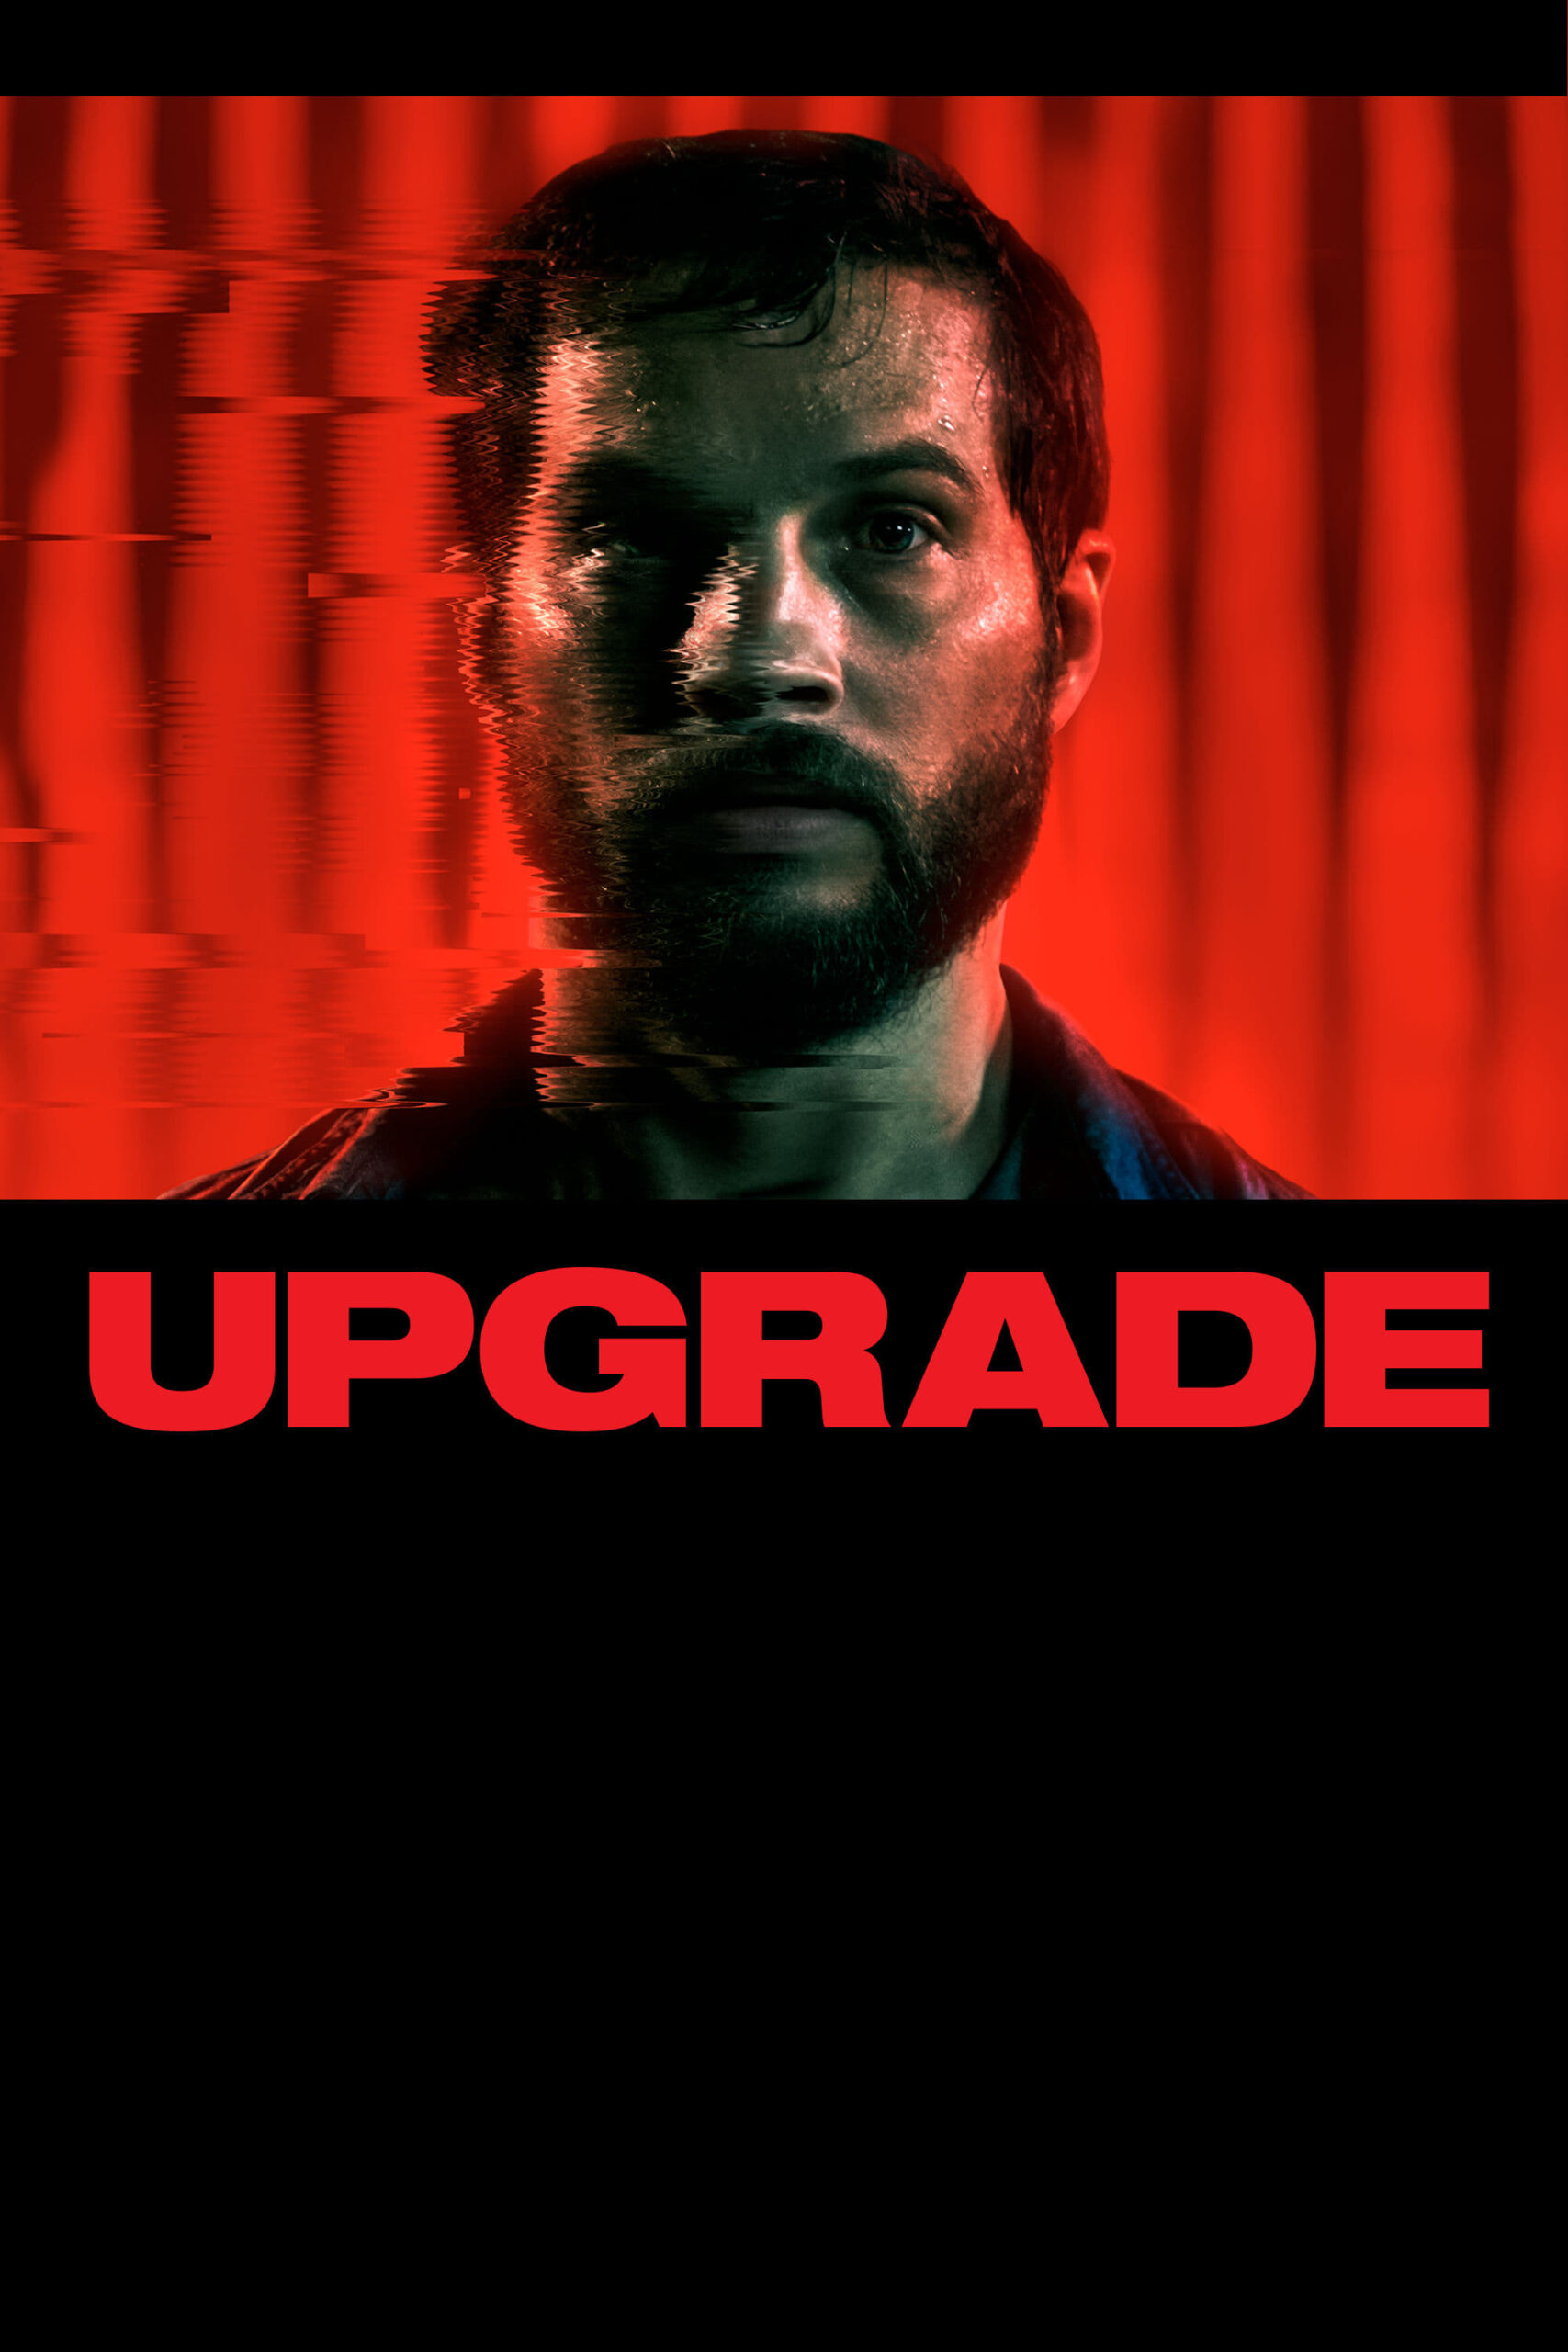 Poster for the movie "Upgrade"